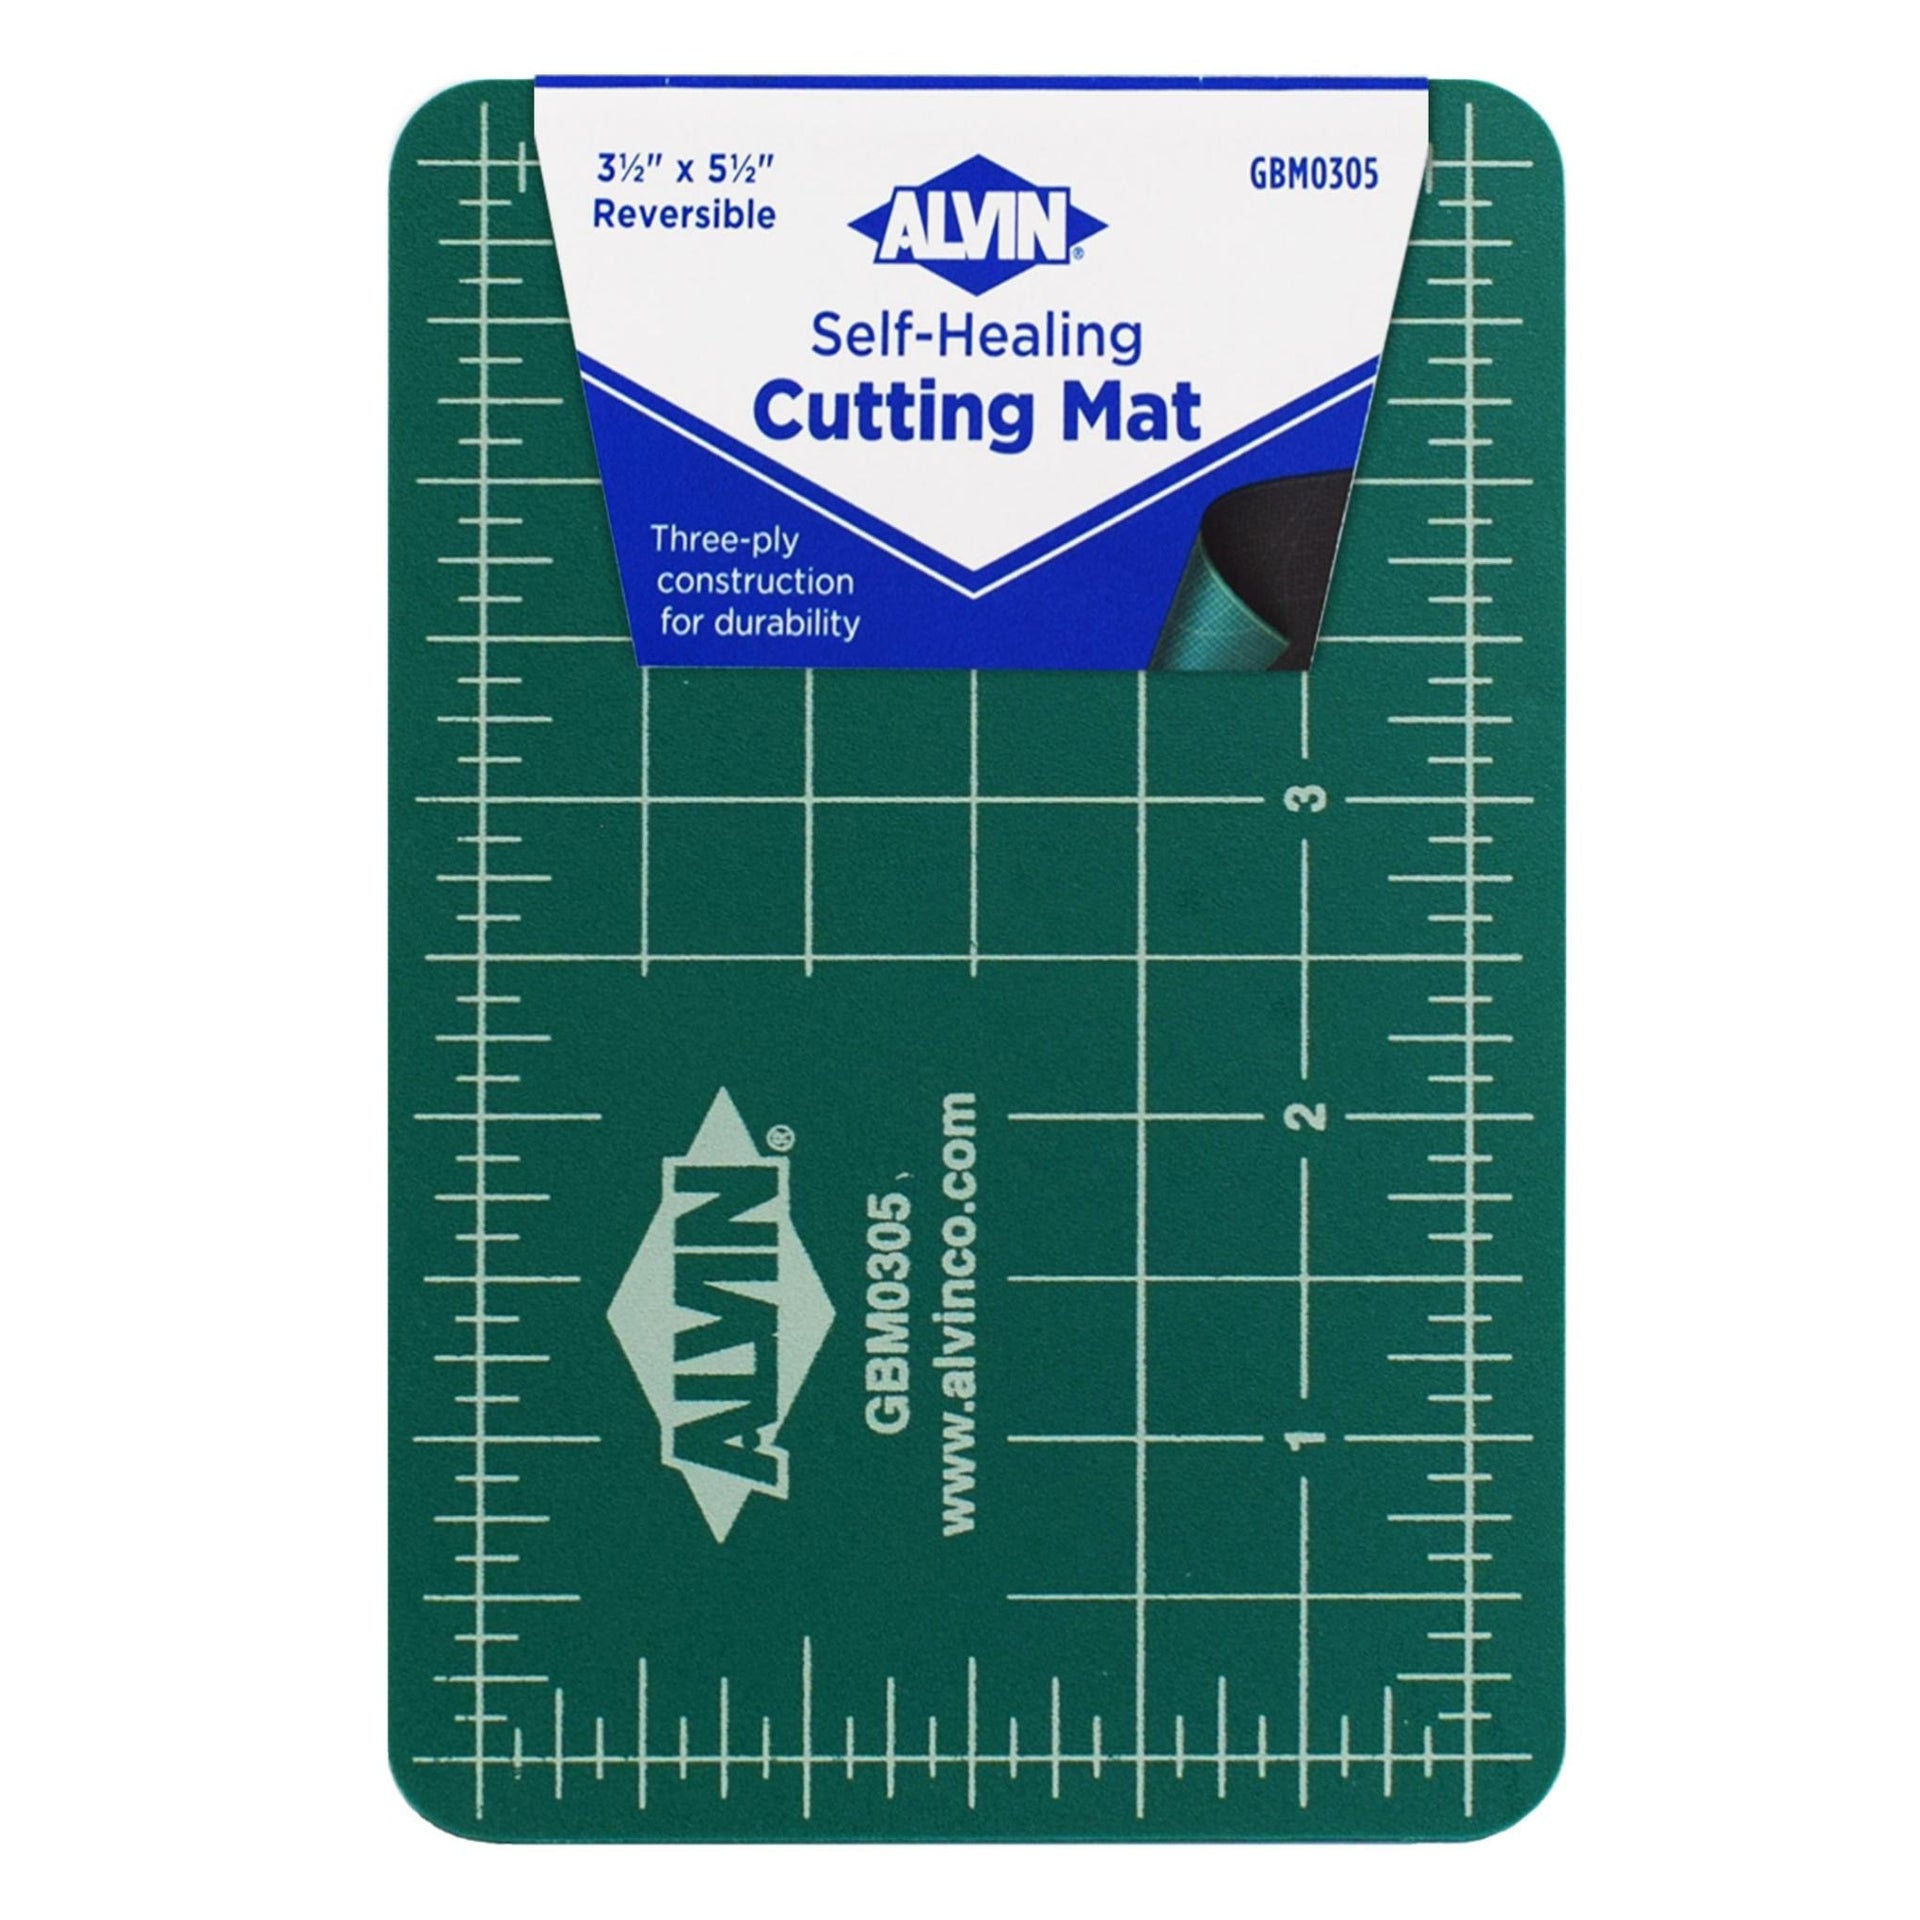 ALVIN, GBM Series Professional Self-Healing Cutting Mat, Green/Black  Double-Sided, Gridded Rotary Cutting Board for Crafts, Sewing, Fabric - 24  x 36